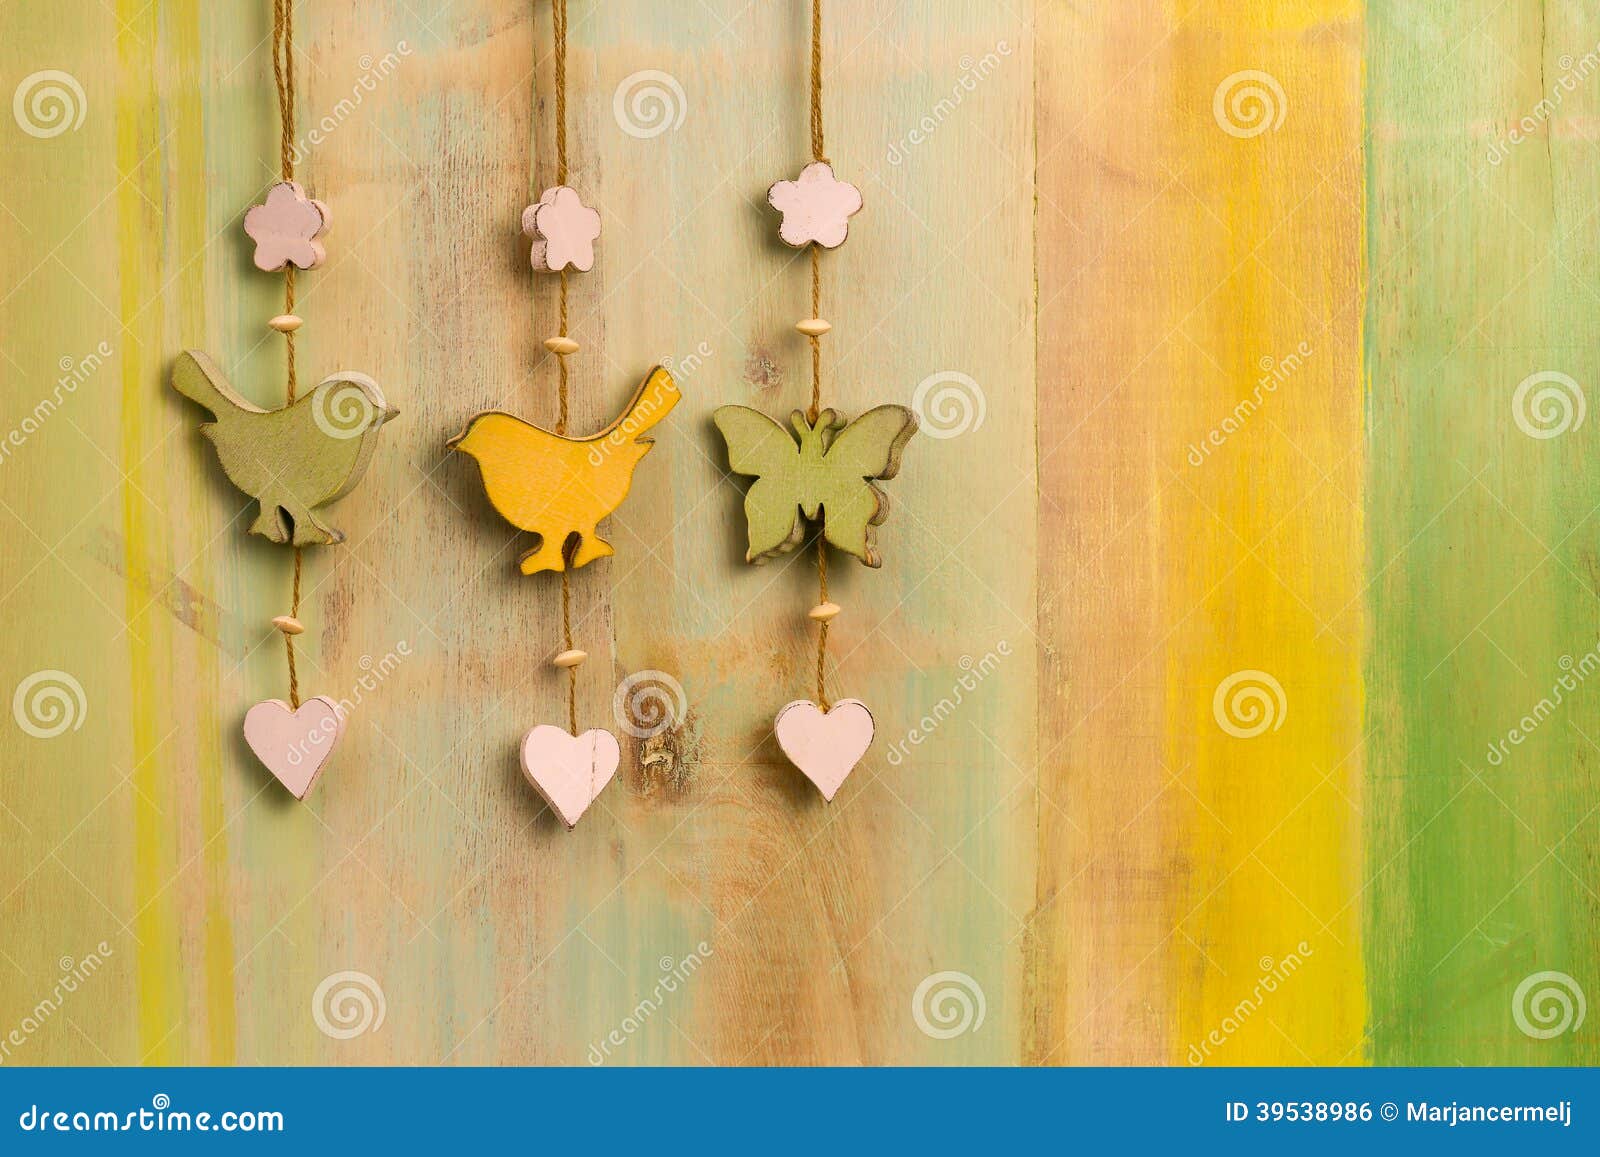 Hanging Decor Wood On String Bird Butterfly Stock Photo 